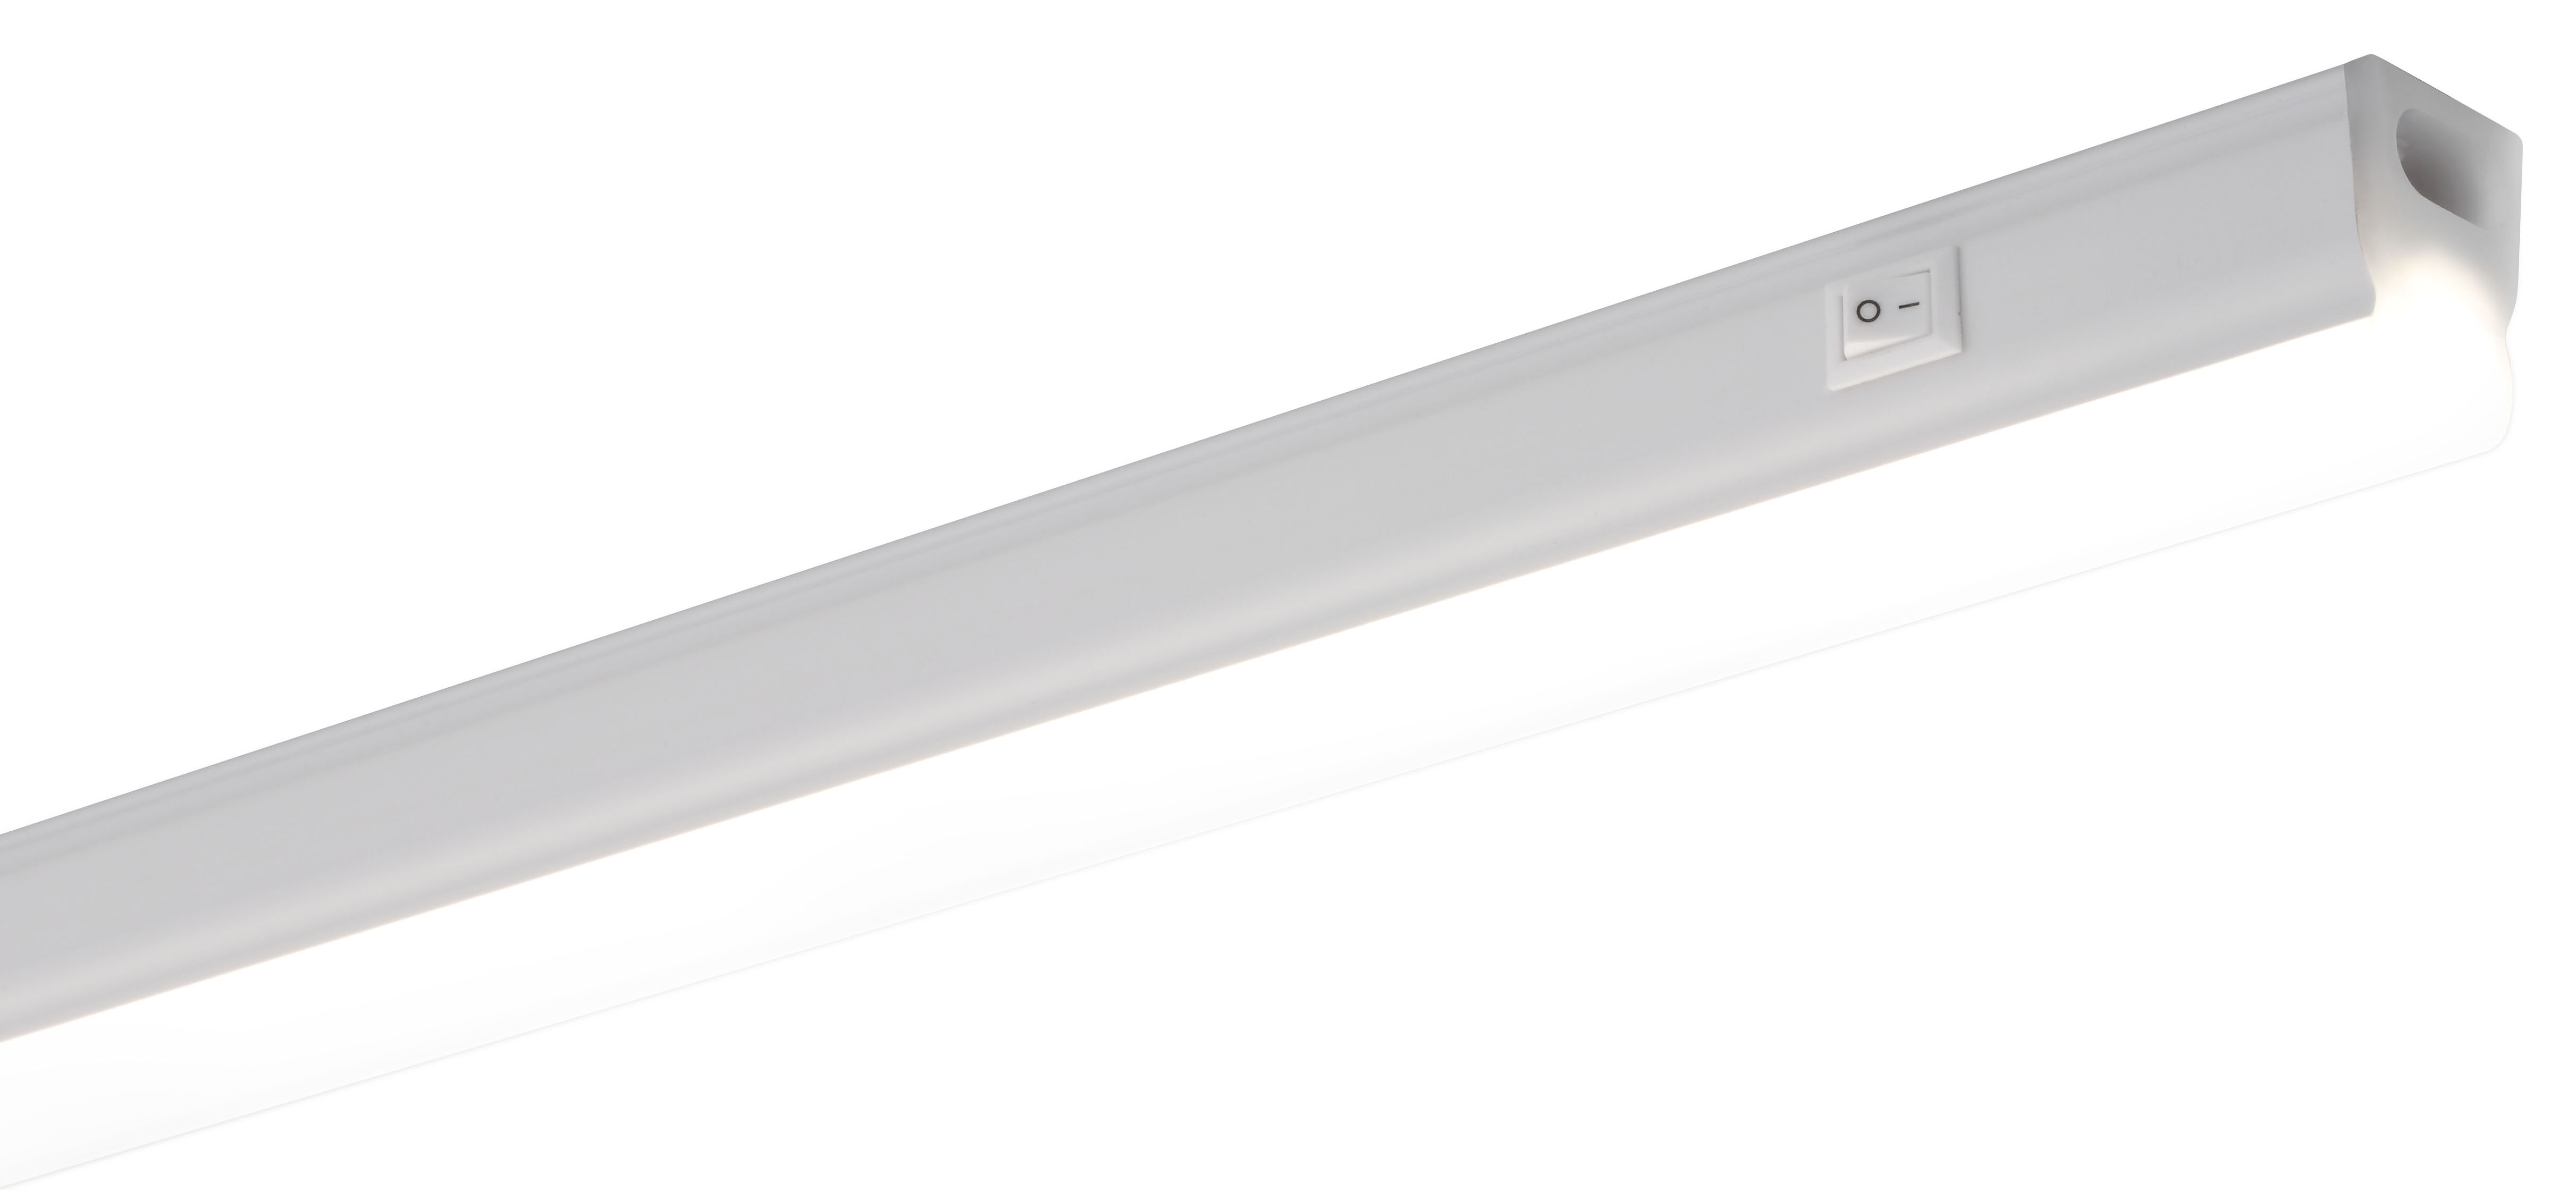 Image of Sylvania LED L600 High Output T5 Replacement Batten Light